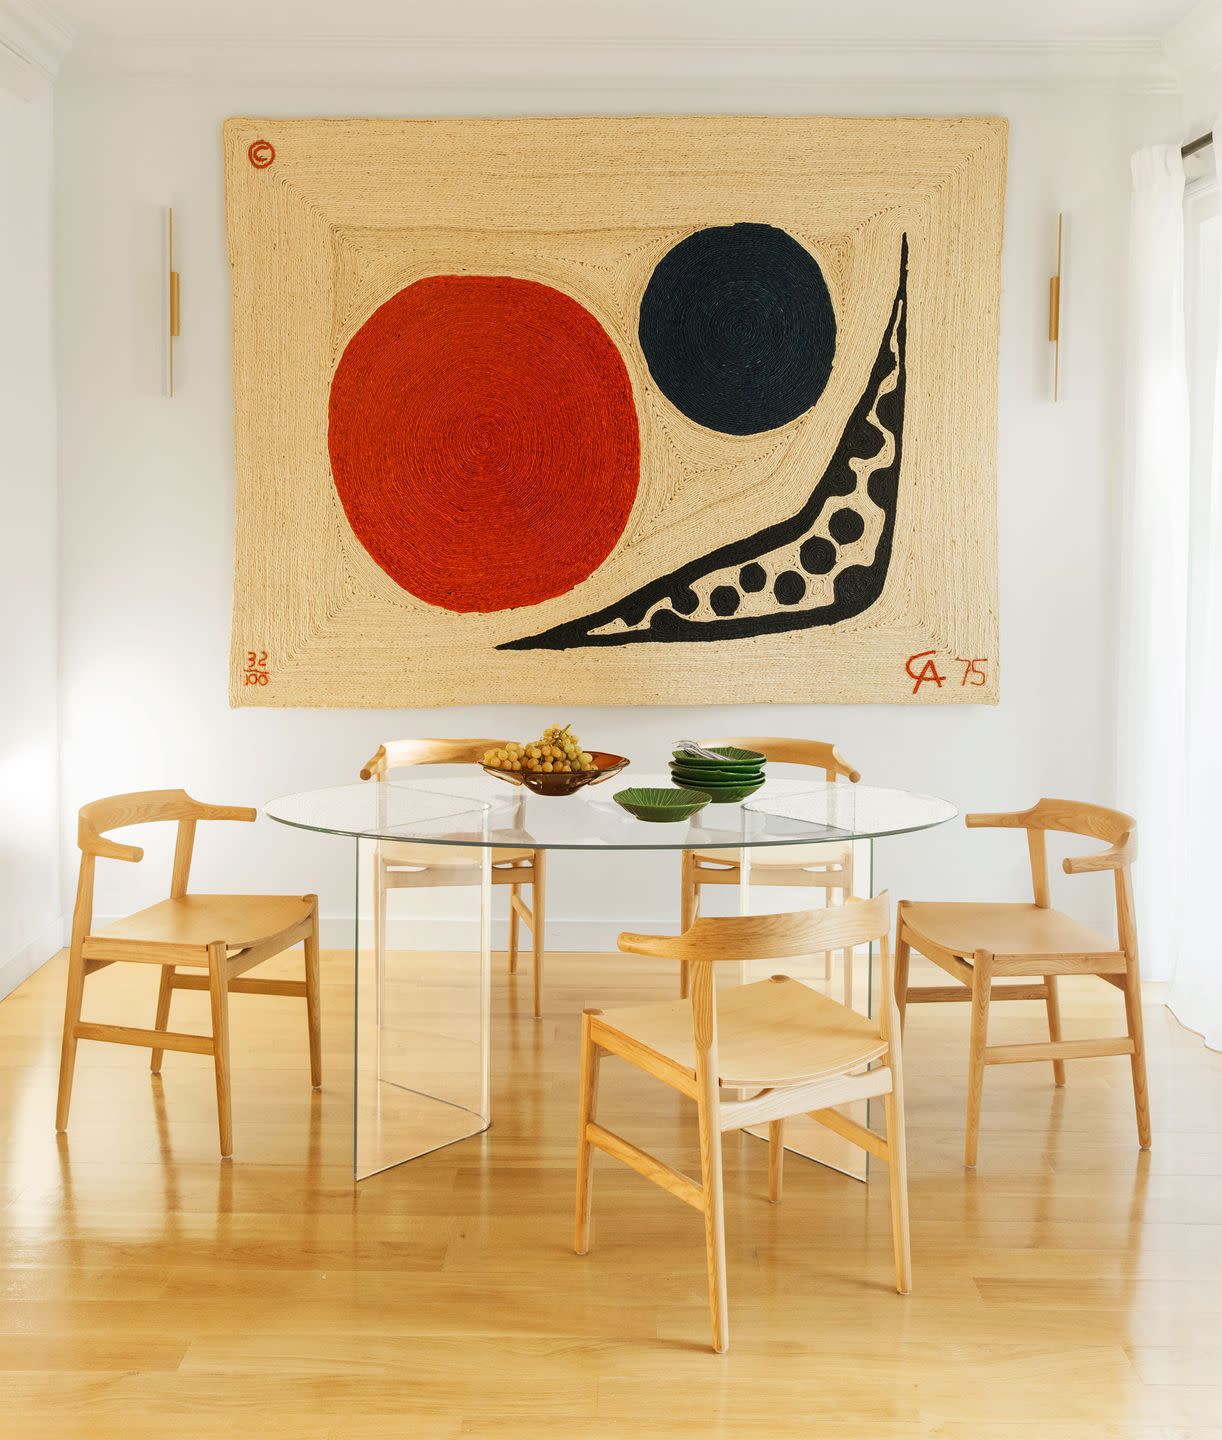 five simple wooden chairs surround a round glass dining table, the floor is wood, and on the wall is a large jute alexander calder tapestry with a red moon, a smaller black planet, and a boomerang shape